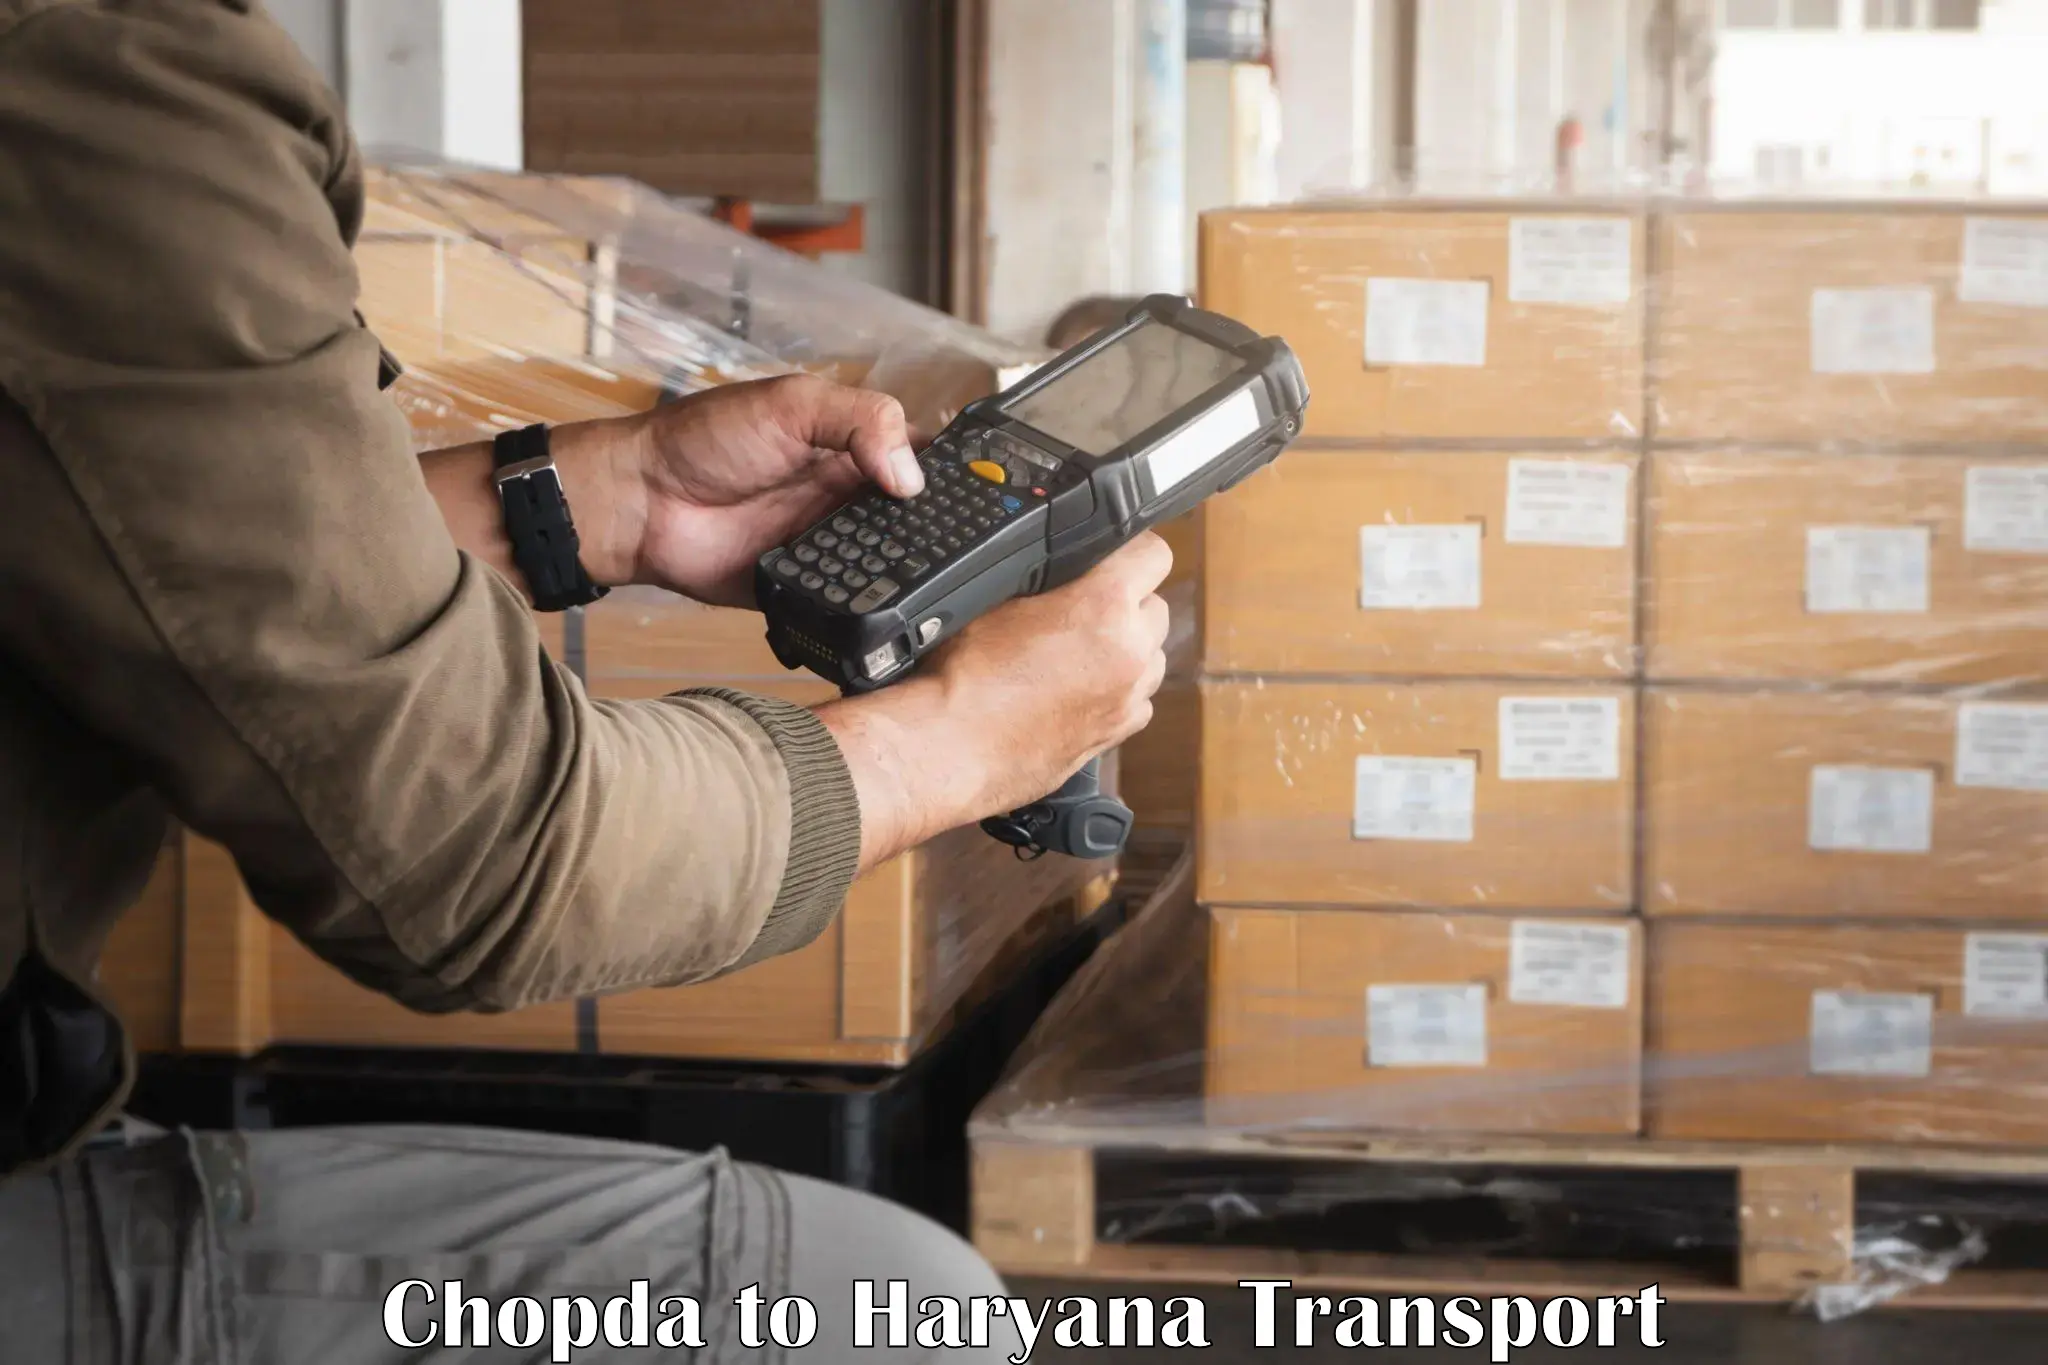 Parcel transport services Chopda to Odhan